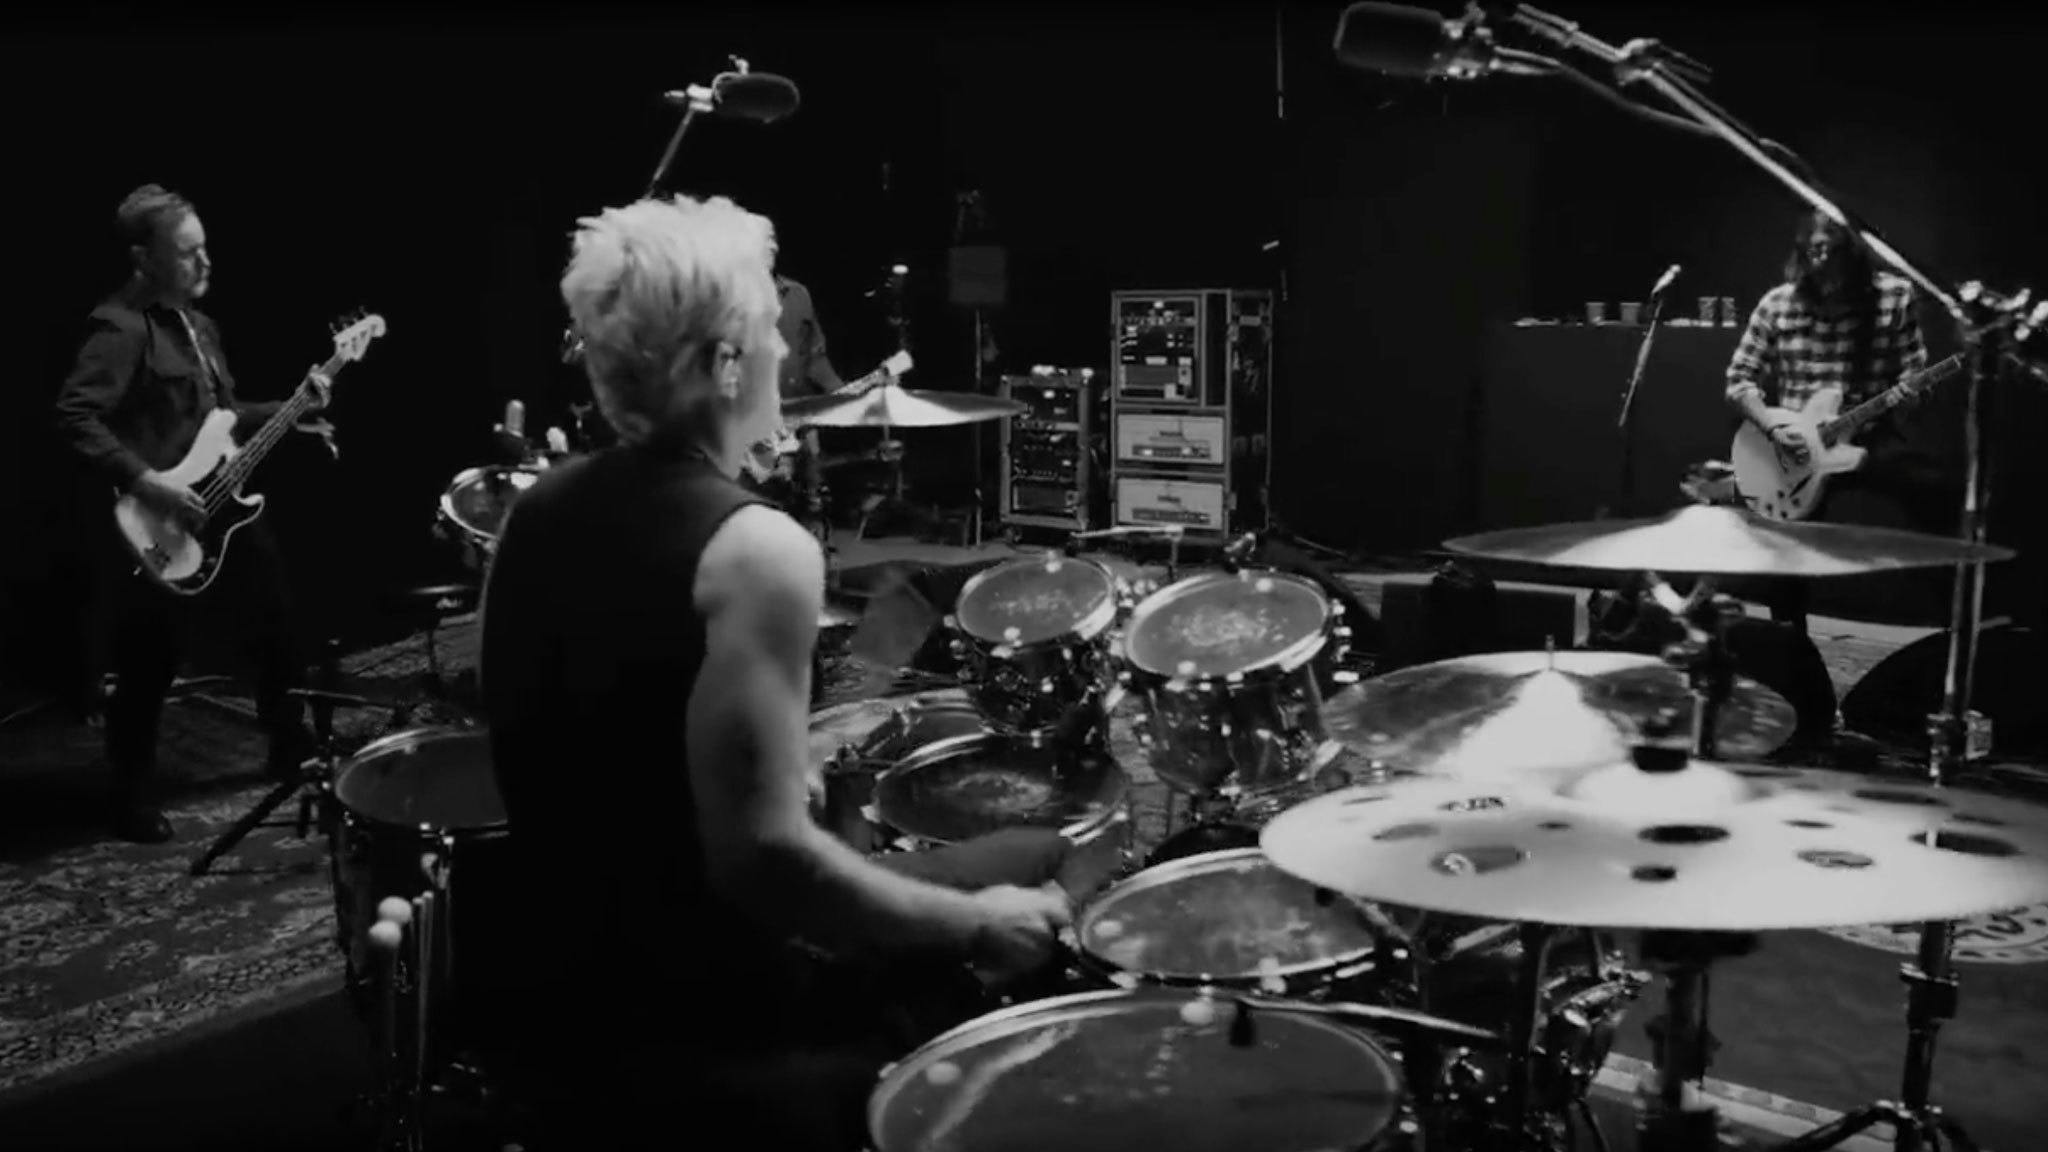 Foo Fighters unveil new drummer, Josh Freese